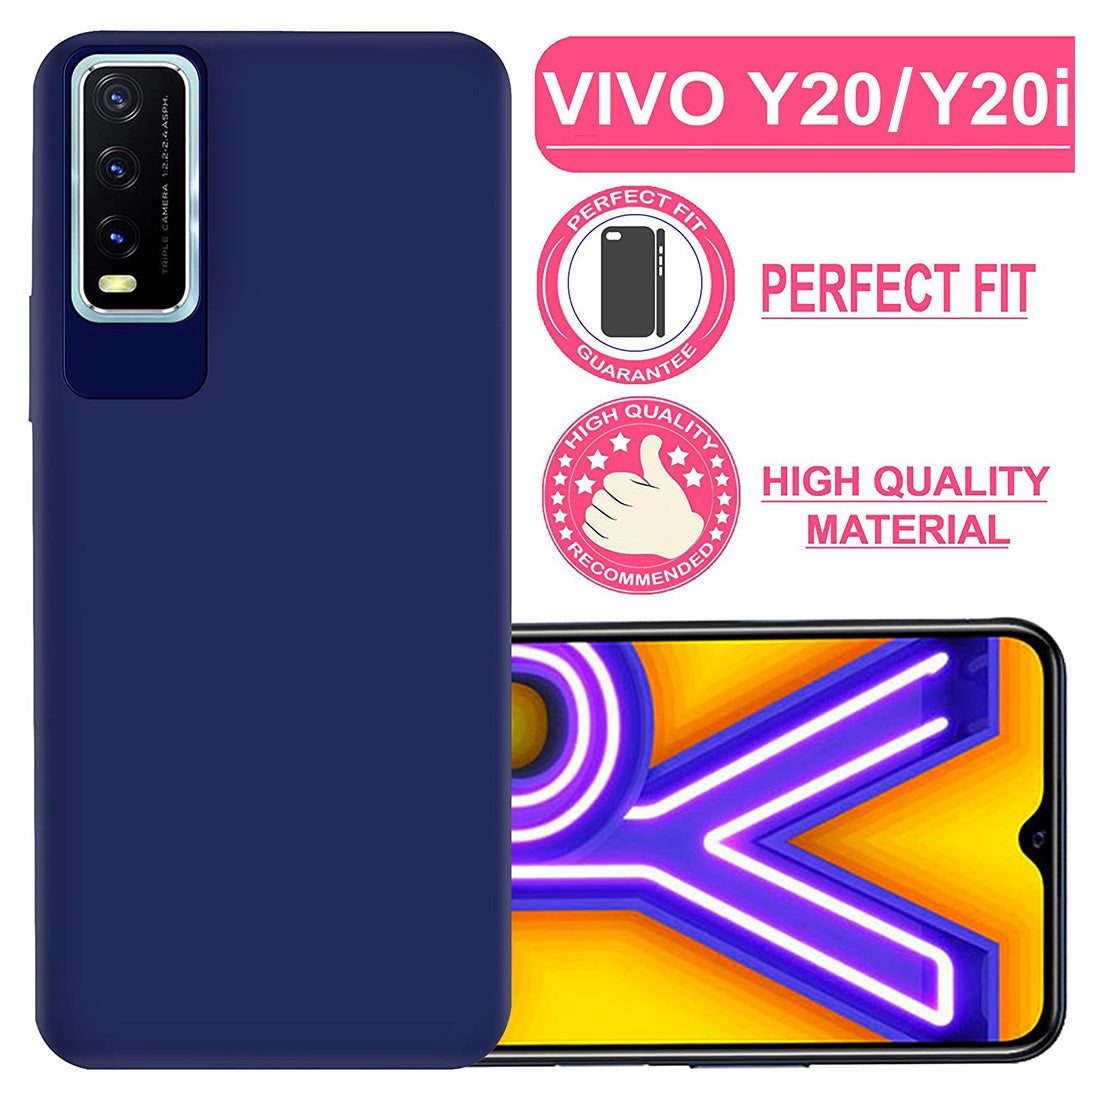 Matte Finish TPU Back Cover for Vivo Y12s / Y20 / Y20i